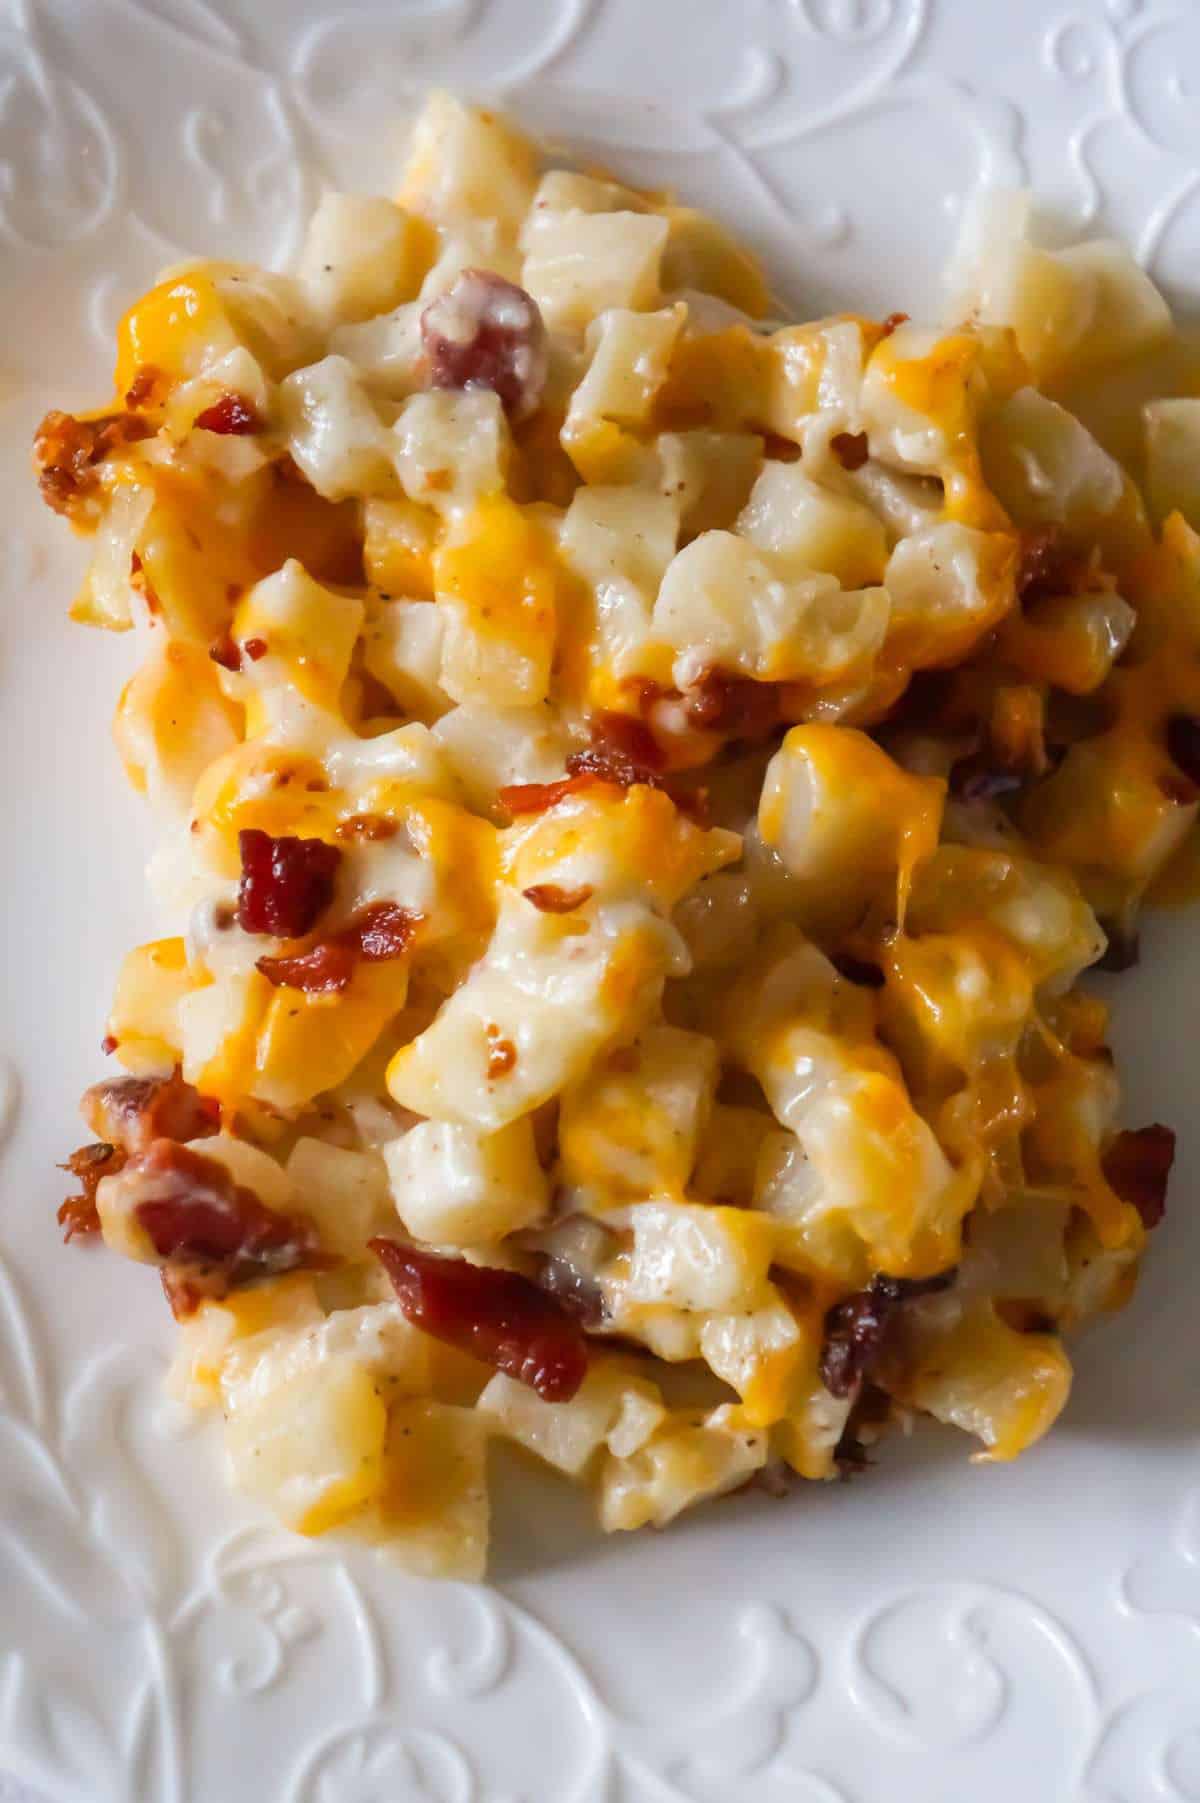 Cheesy Potato Casserole with Bacon is a delicious side dish recipe made with frozen diced hash brown potatoes, Campbell's condensed cream of bacon soup, shredded mozzarella, cheddar and crumbled bacon.